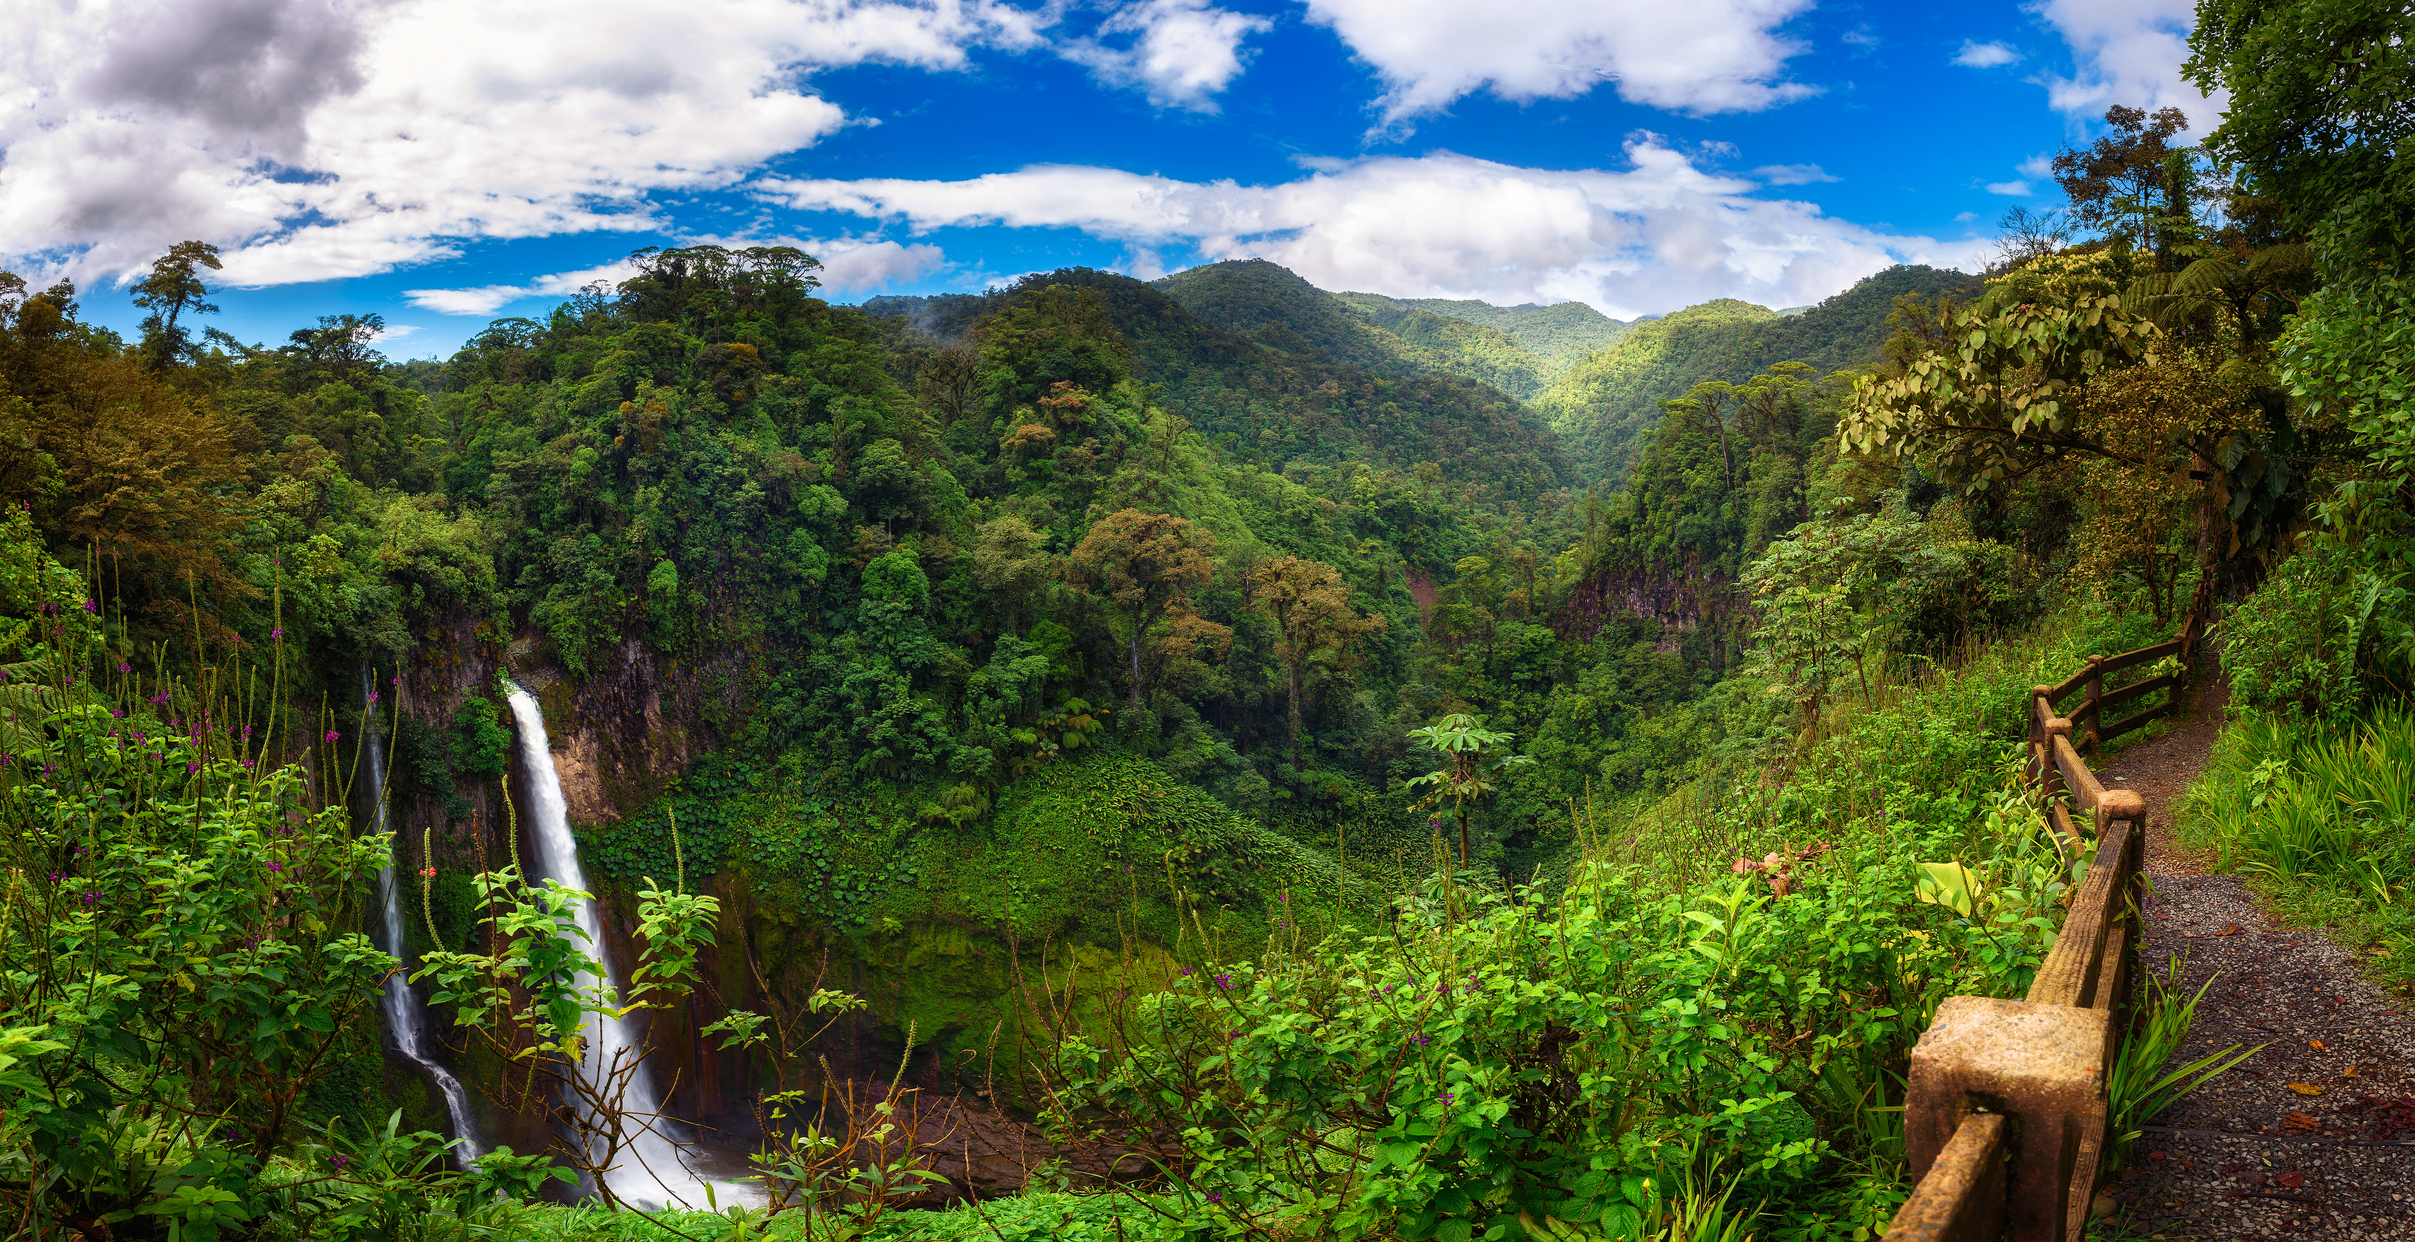 How is Climate Change Affecting Costa Rica?